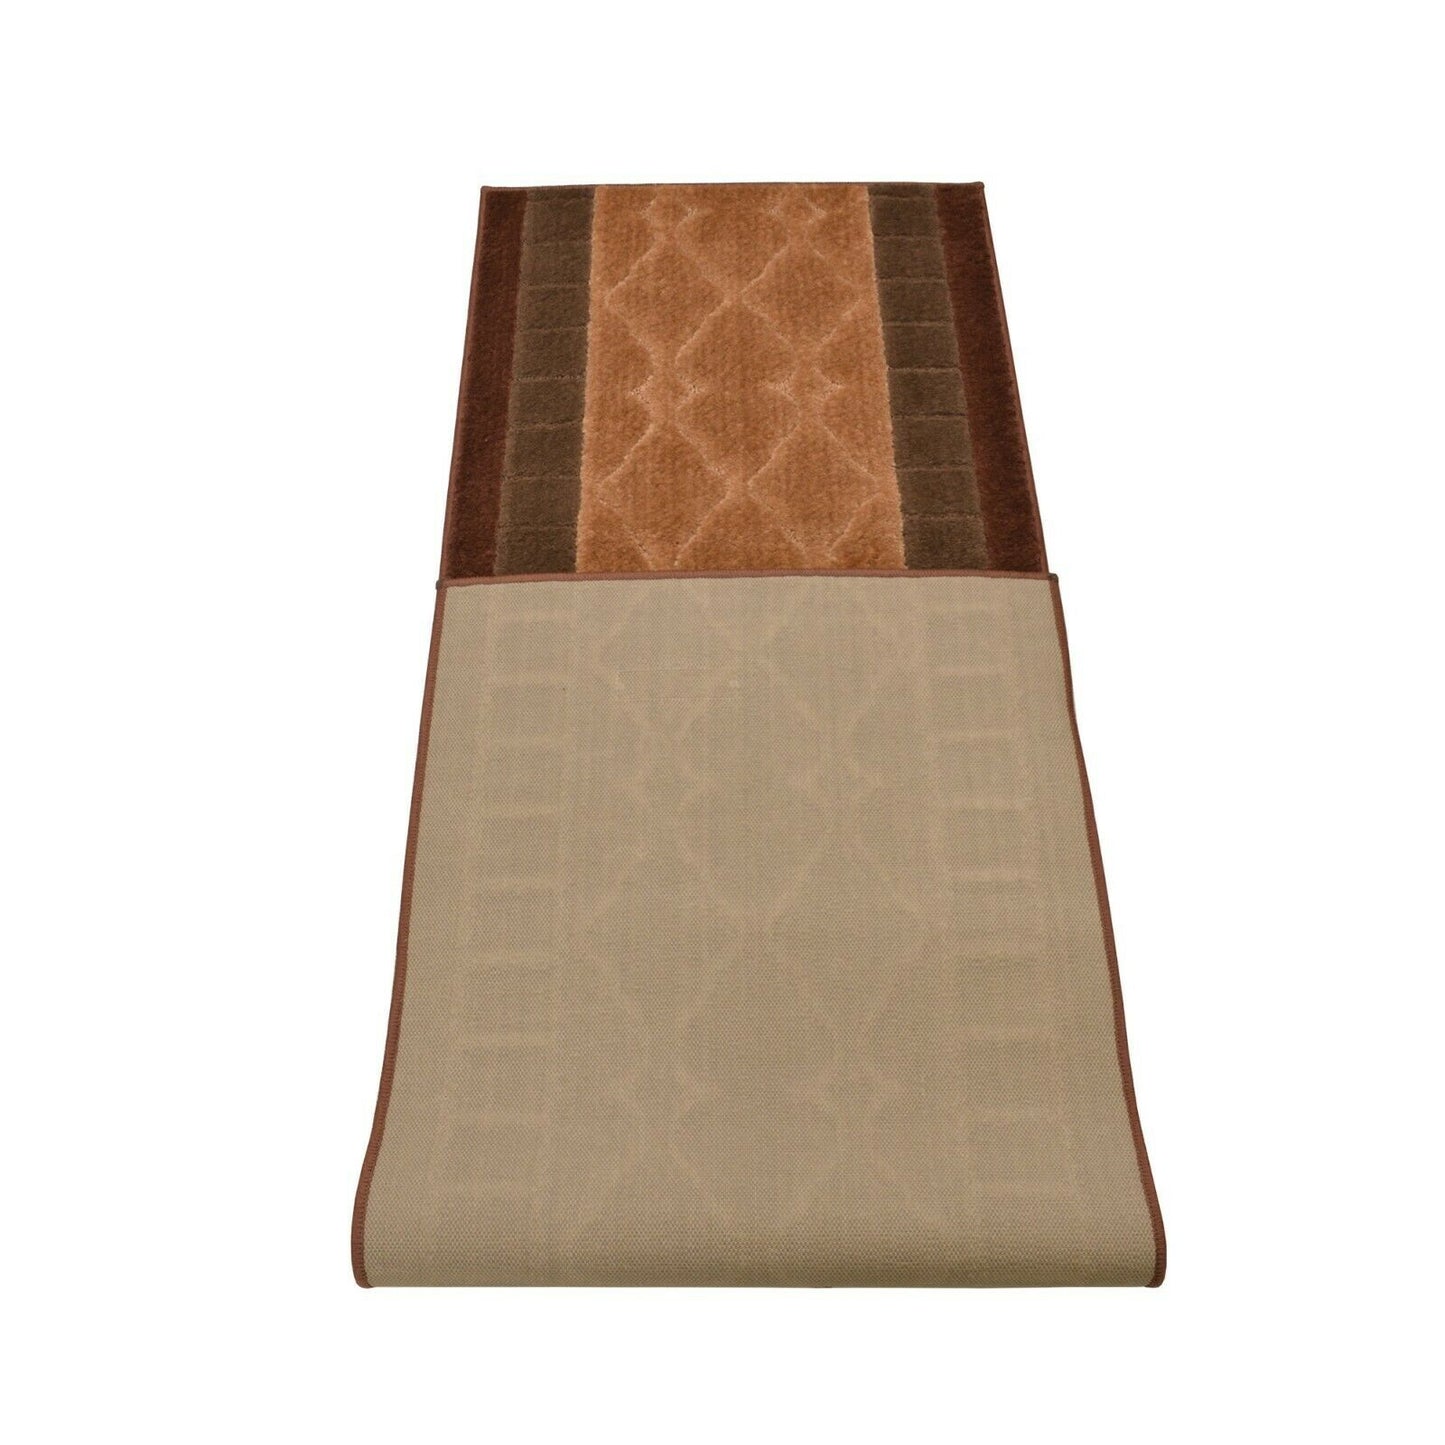 Custom Size Runner Rug Wide Trellis Beige-Brown Color Skid Resistant Rug Runner Customize Up to 50 Feet and 26 Inch Width Cut to Size Rugs